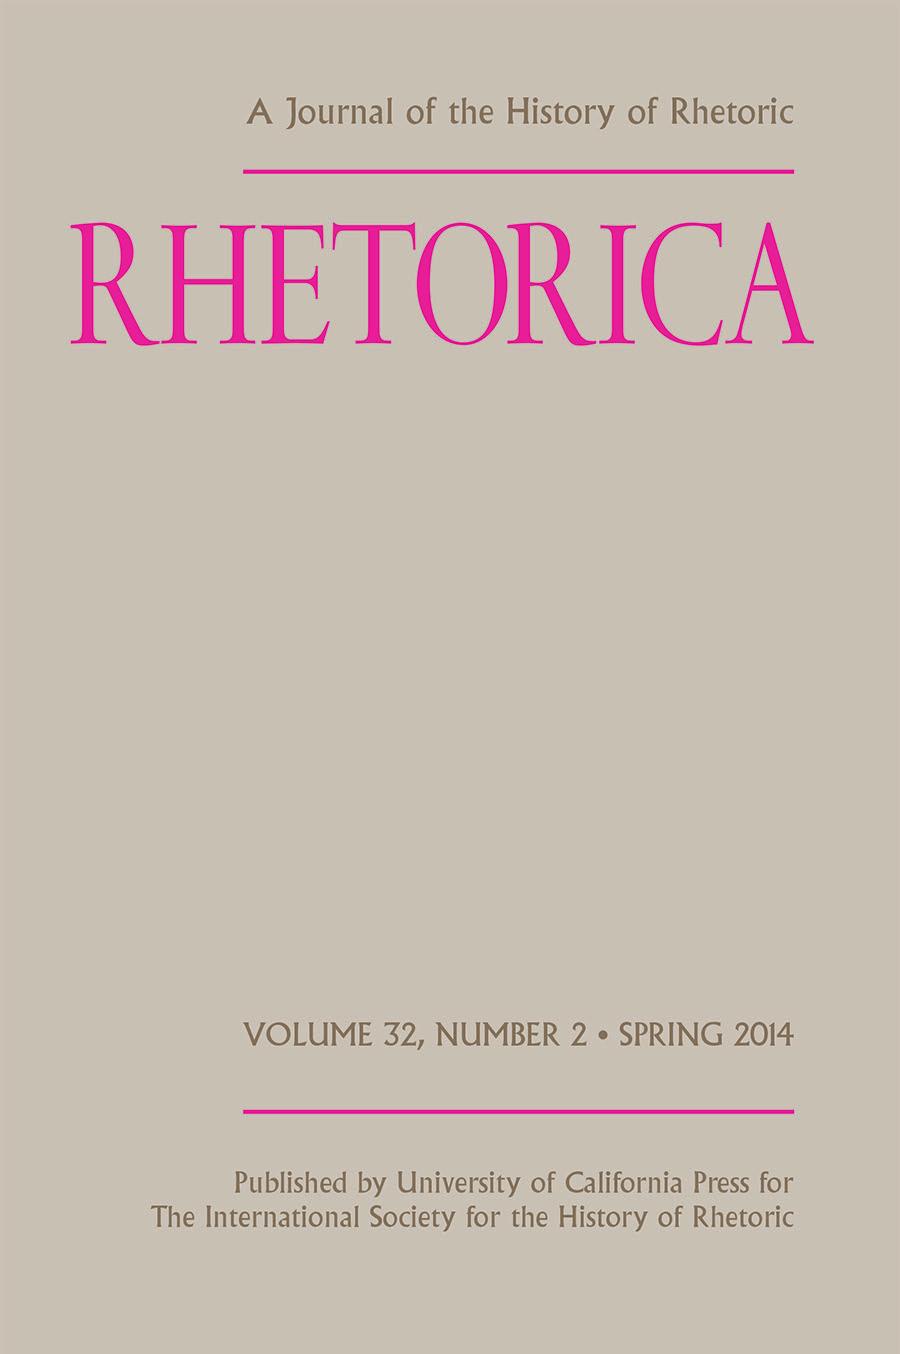 RHETORICA Full page: 4 ½ x 7 ½ $ 350 Half page: 4 ½ x 3 ¾ $ 270 February December 15 January 1 May March 15 April 1 August June 15 July 1 November September 15 October 1 RHETORICA: A JOURNAL OF THE